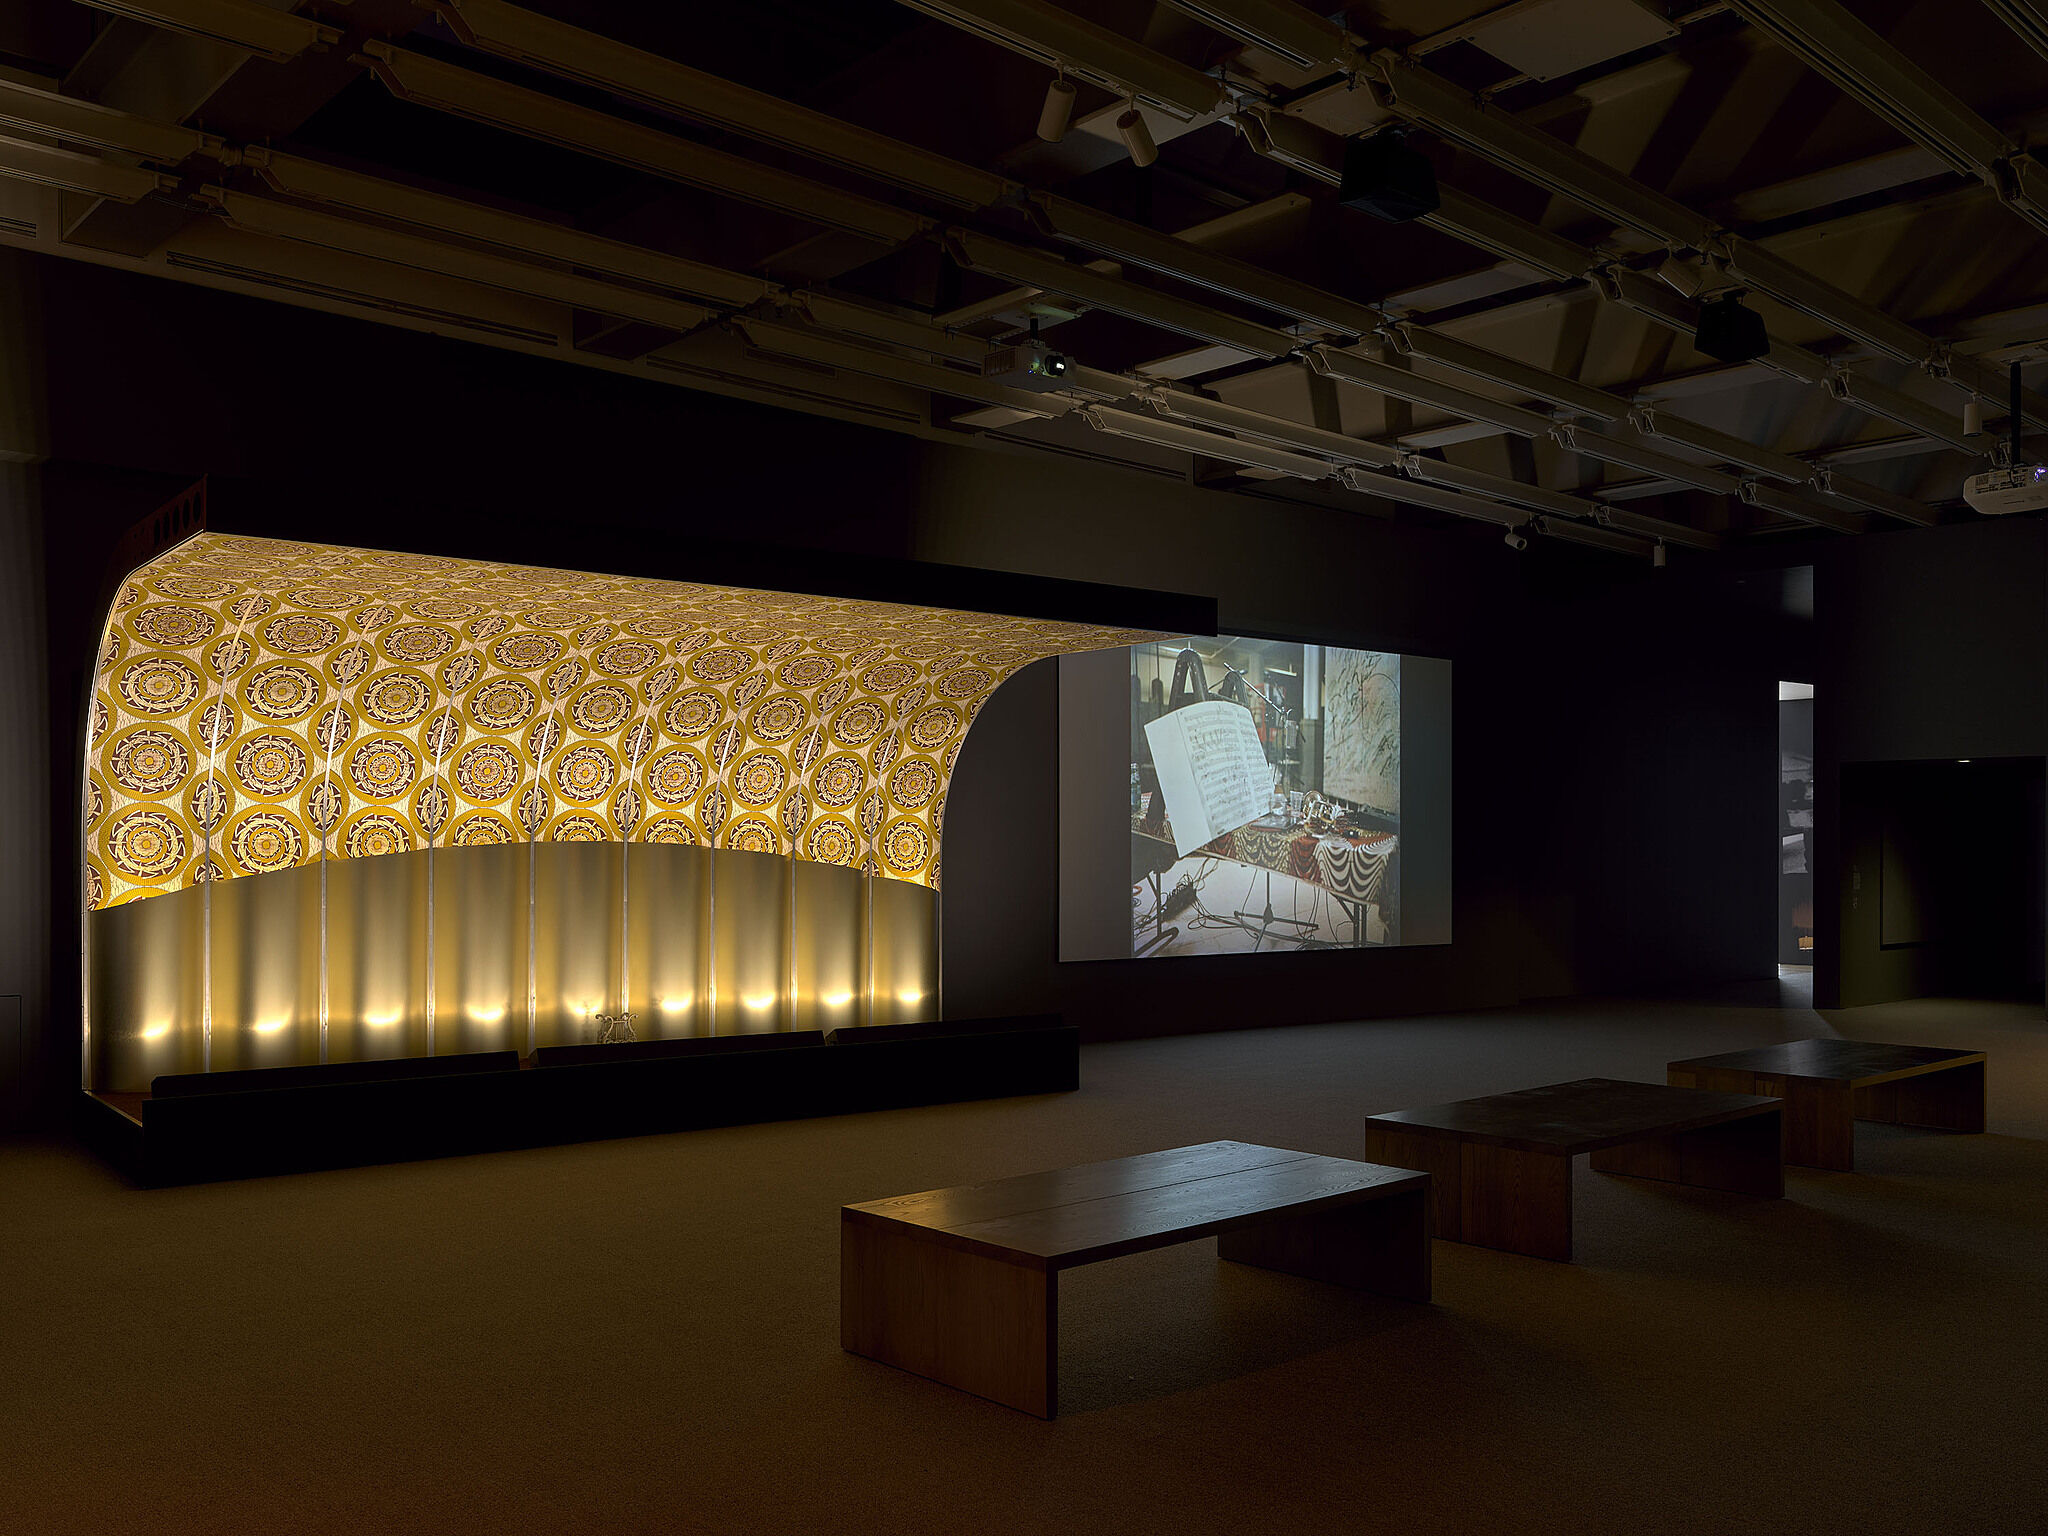 An image of the Whitney galleries with various video projections, stages, and musical instruments